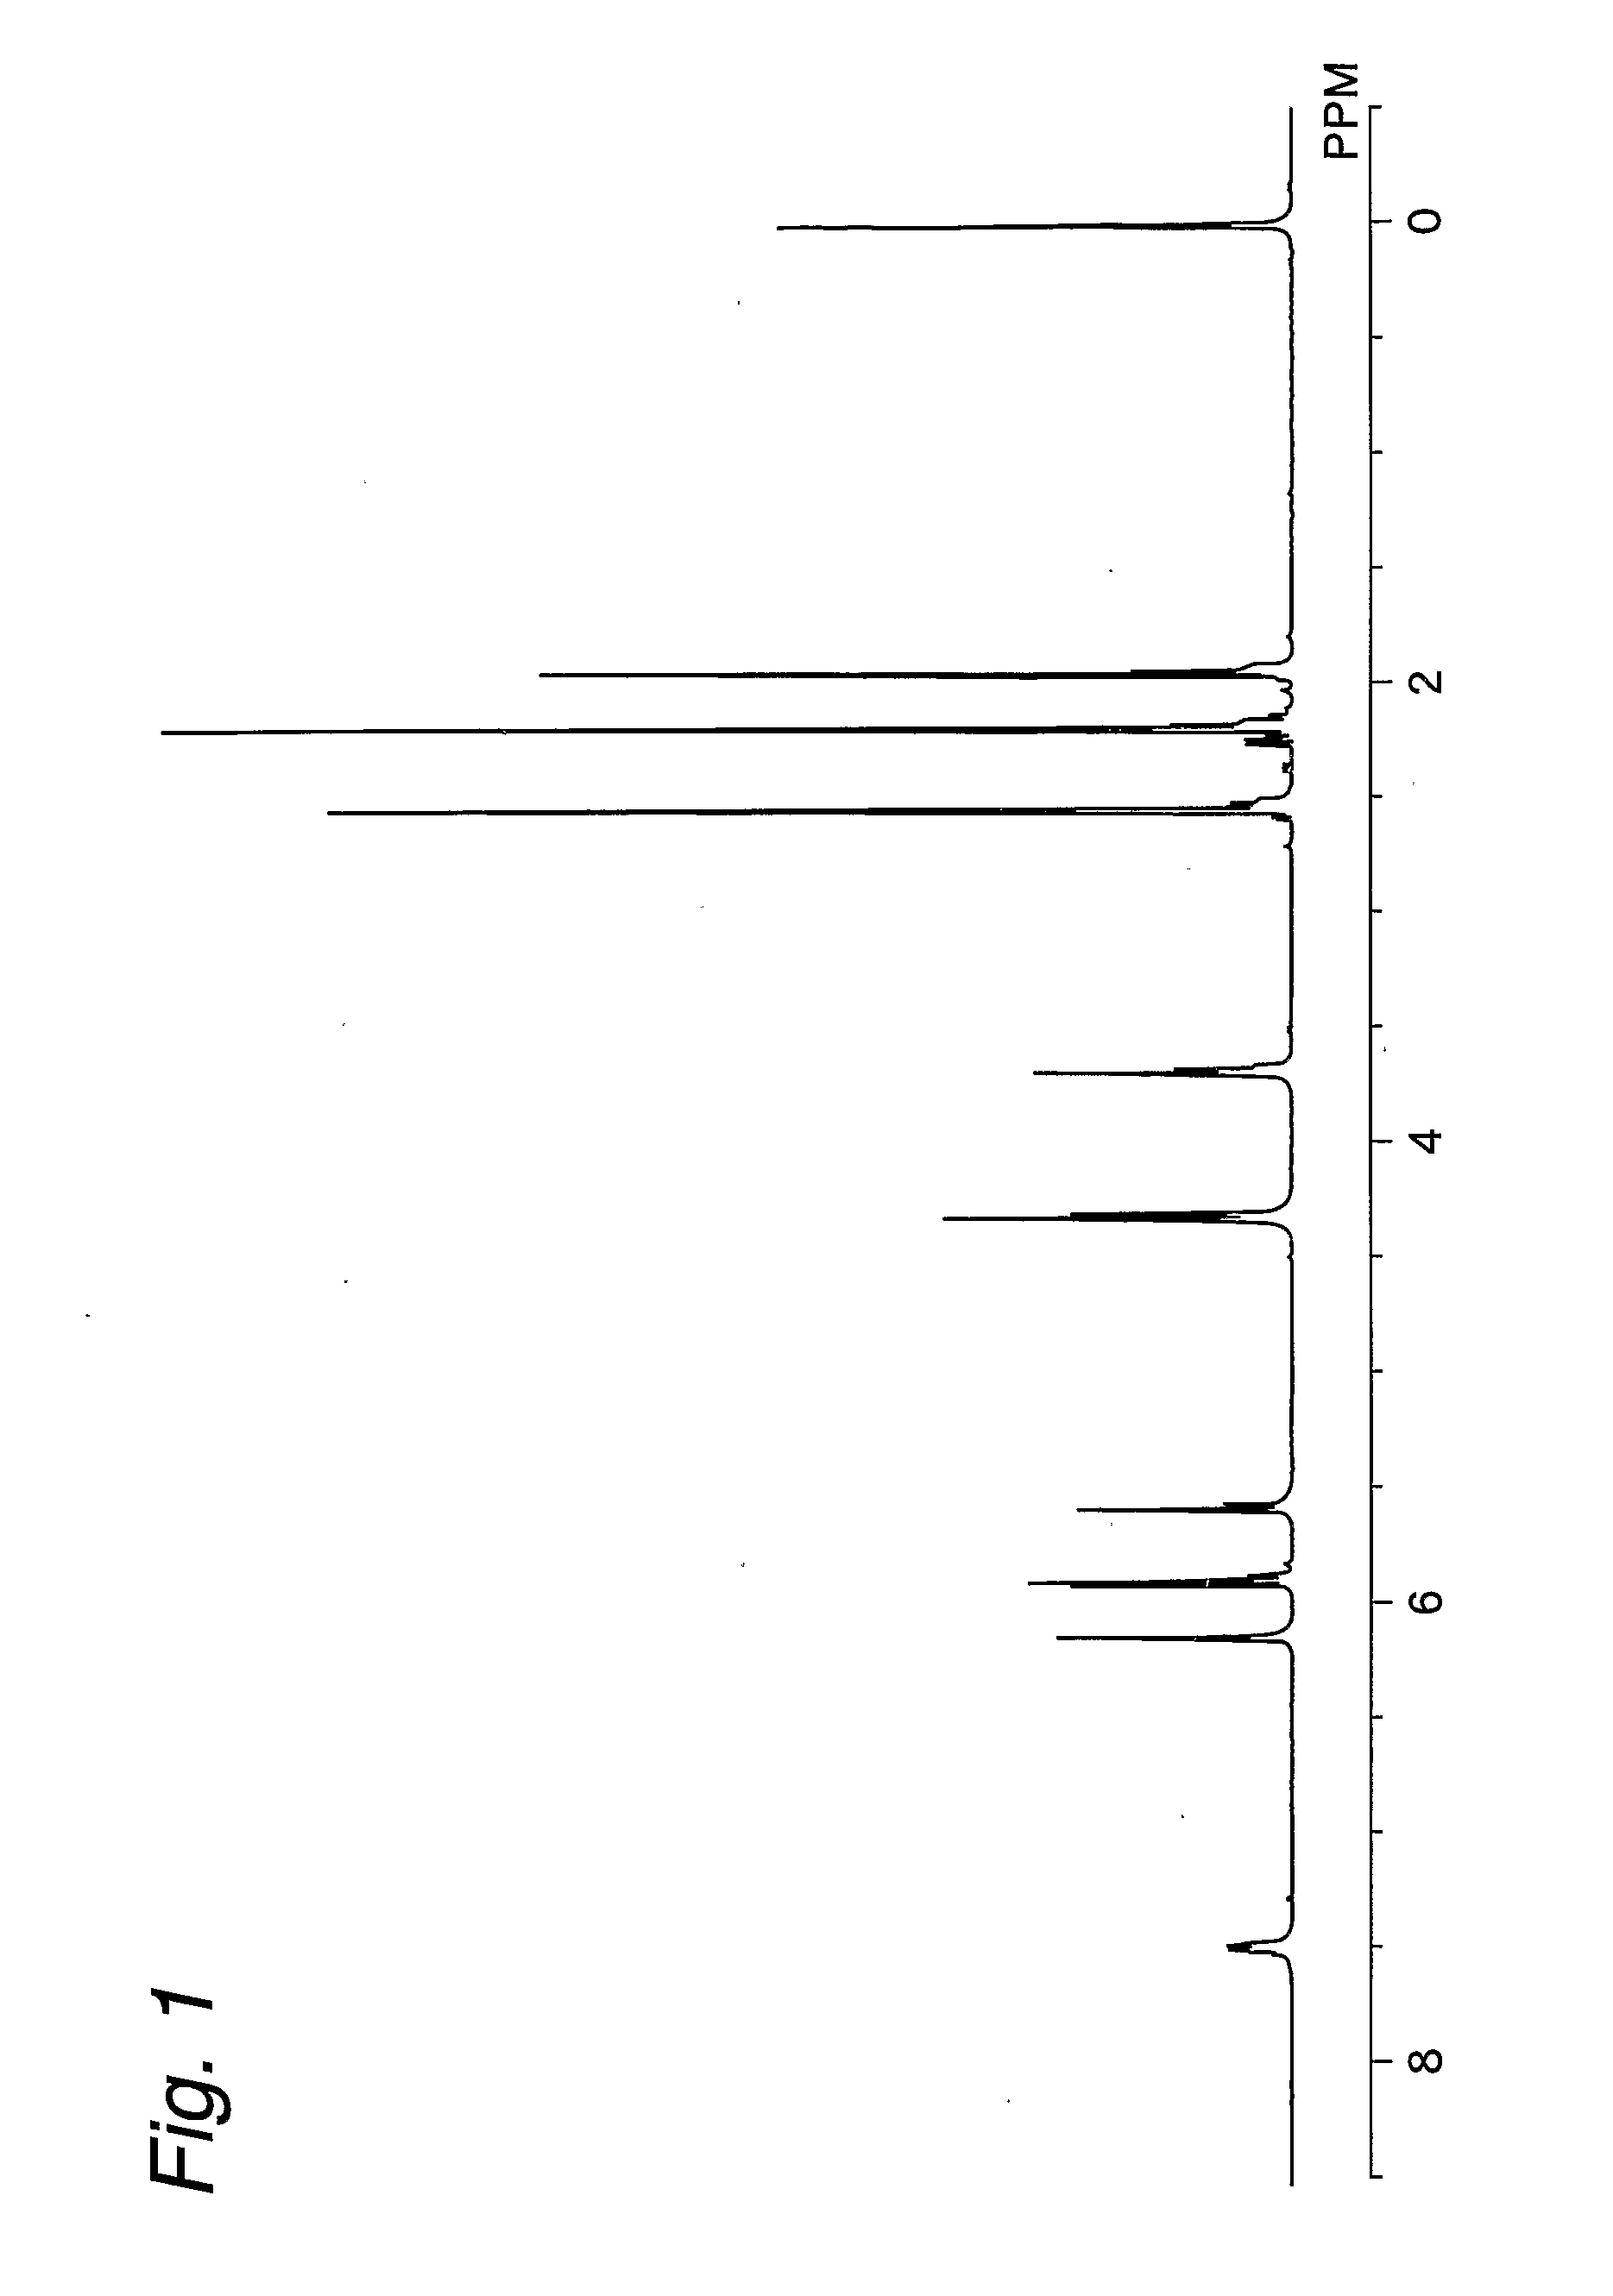 Process for Producing Blocked Isocyanate Compound